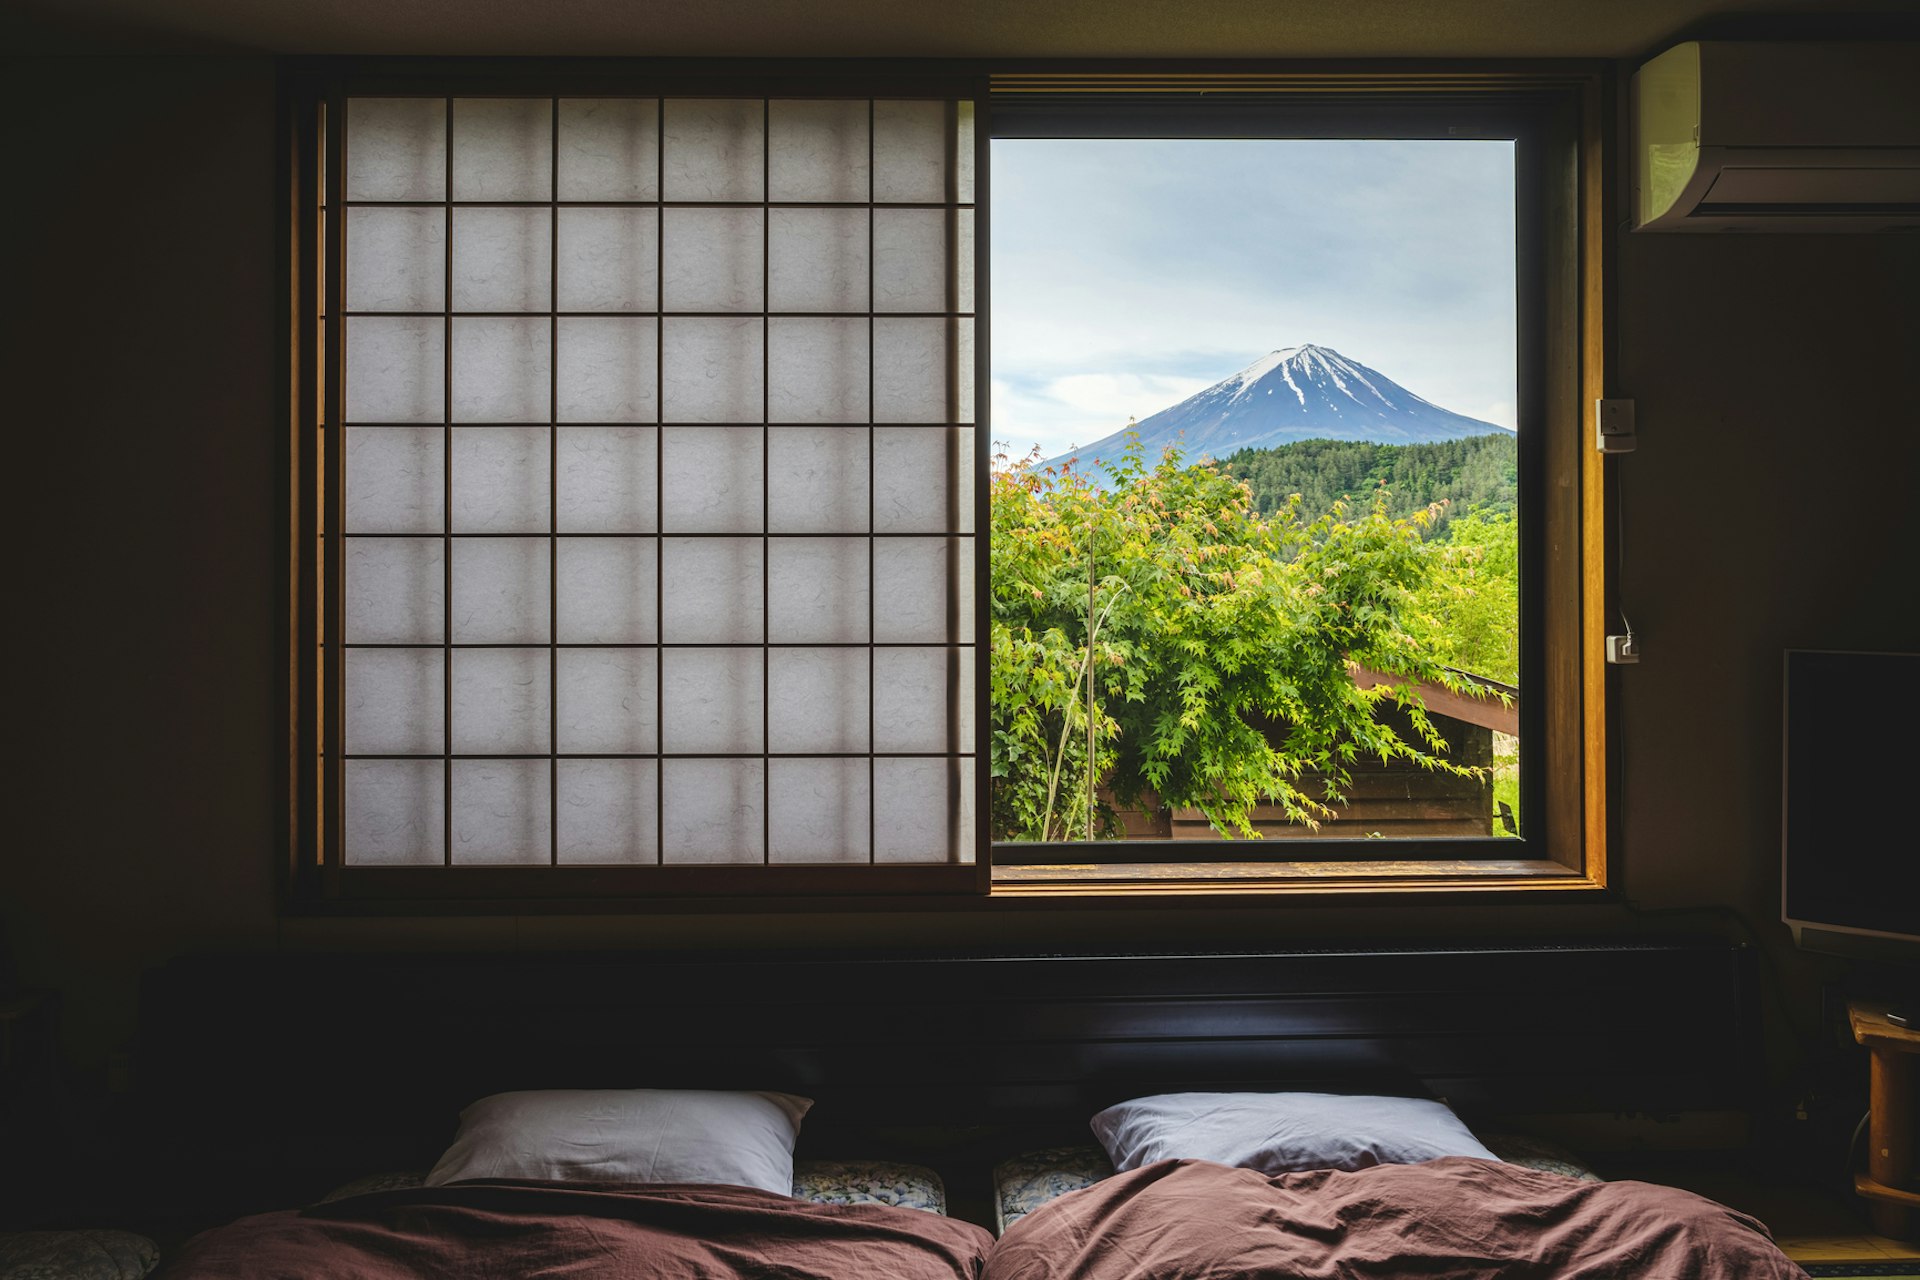 A view of Mt. Fuji through the window of a Japanese inn